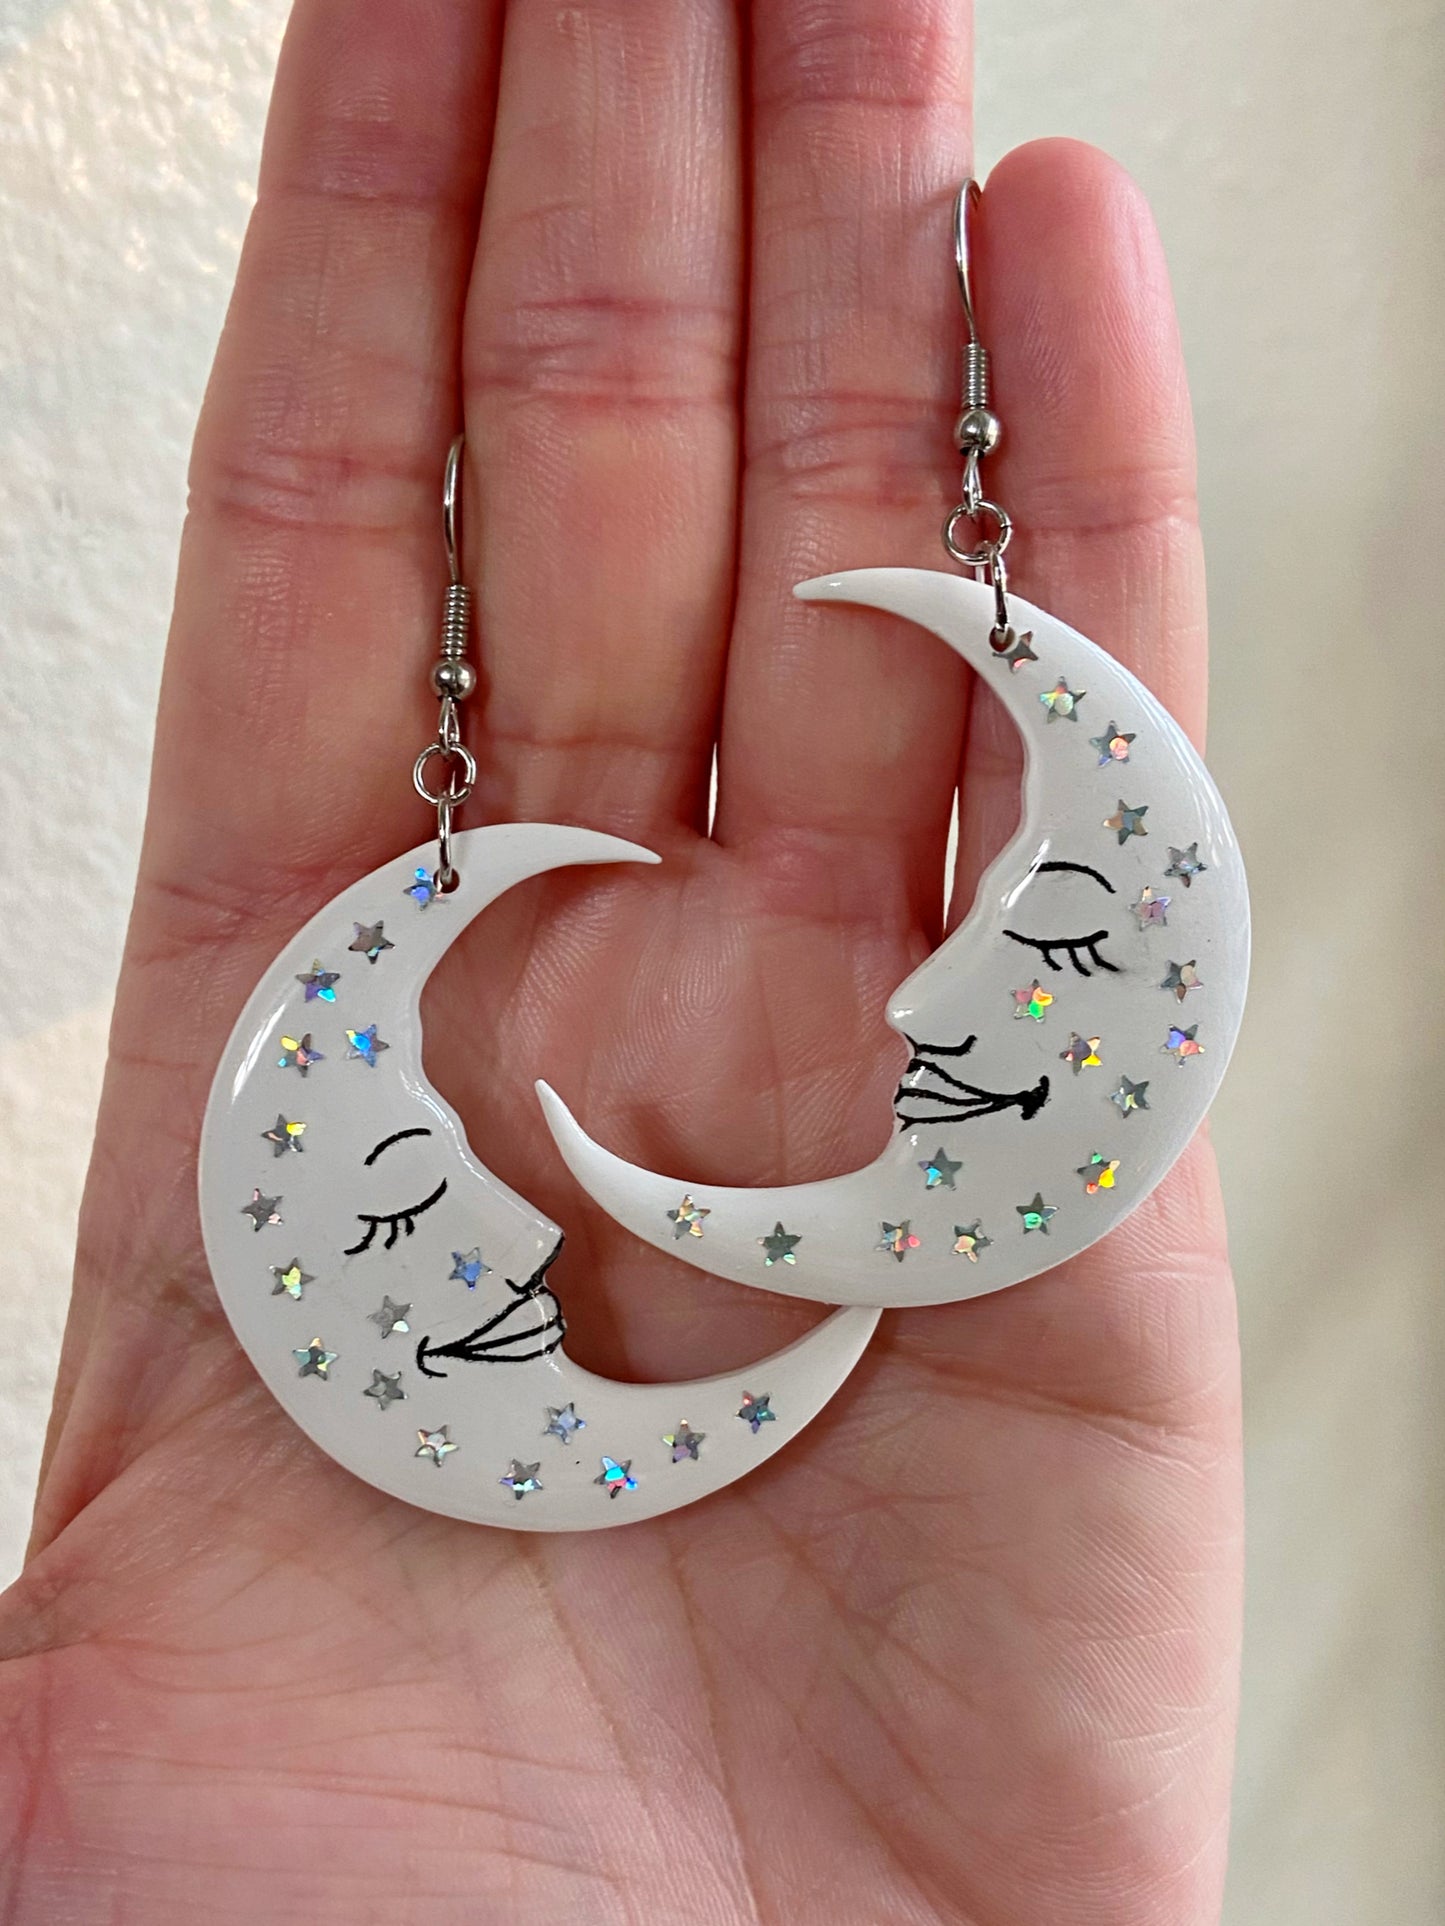 Sleepy Moons- White celestial crescent moon earrings with holographic rainbow glitter stars